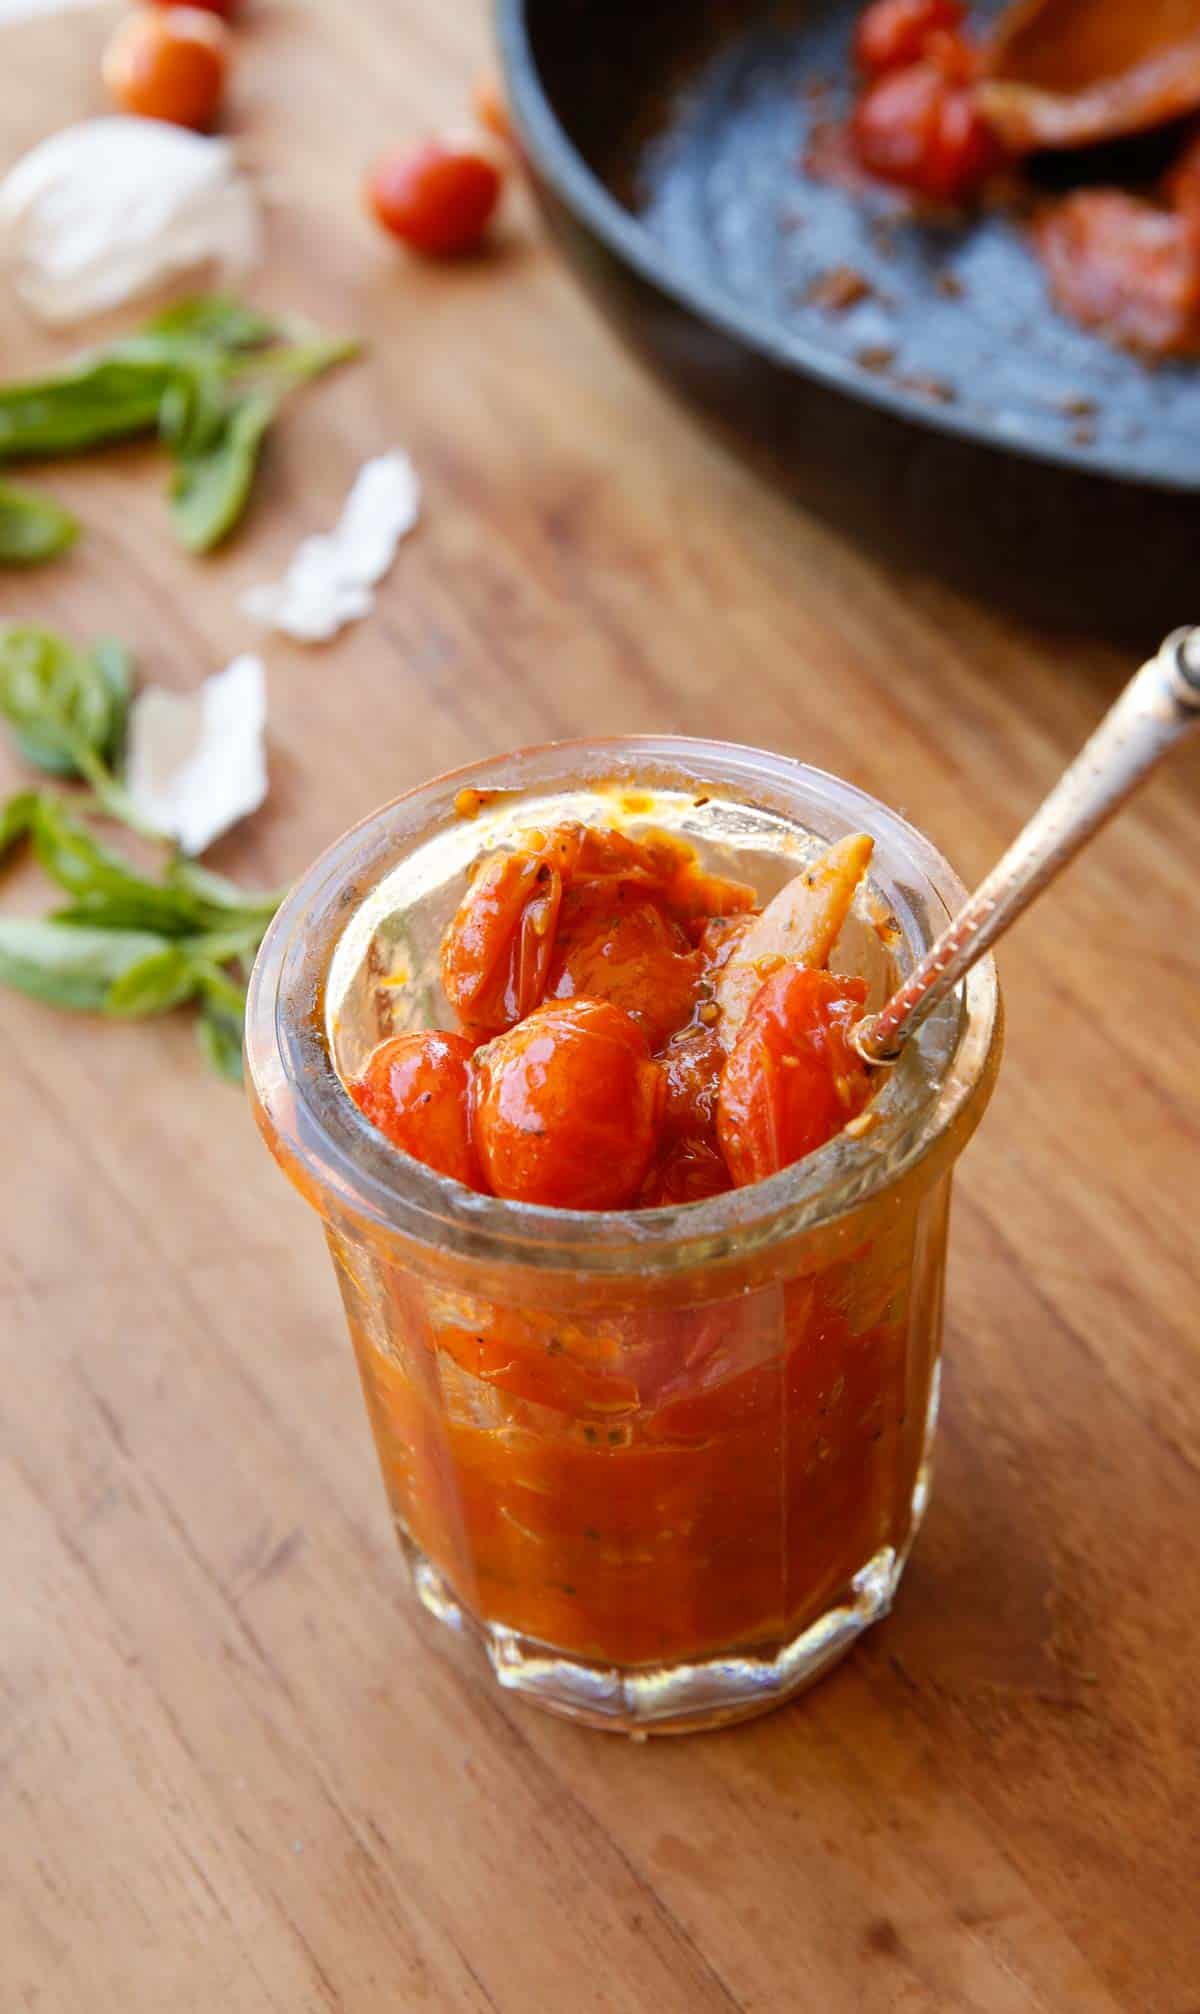 A Jam Jar Filled with Tomato Jam and a Silver Spoon